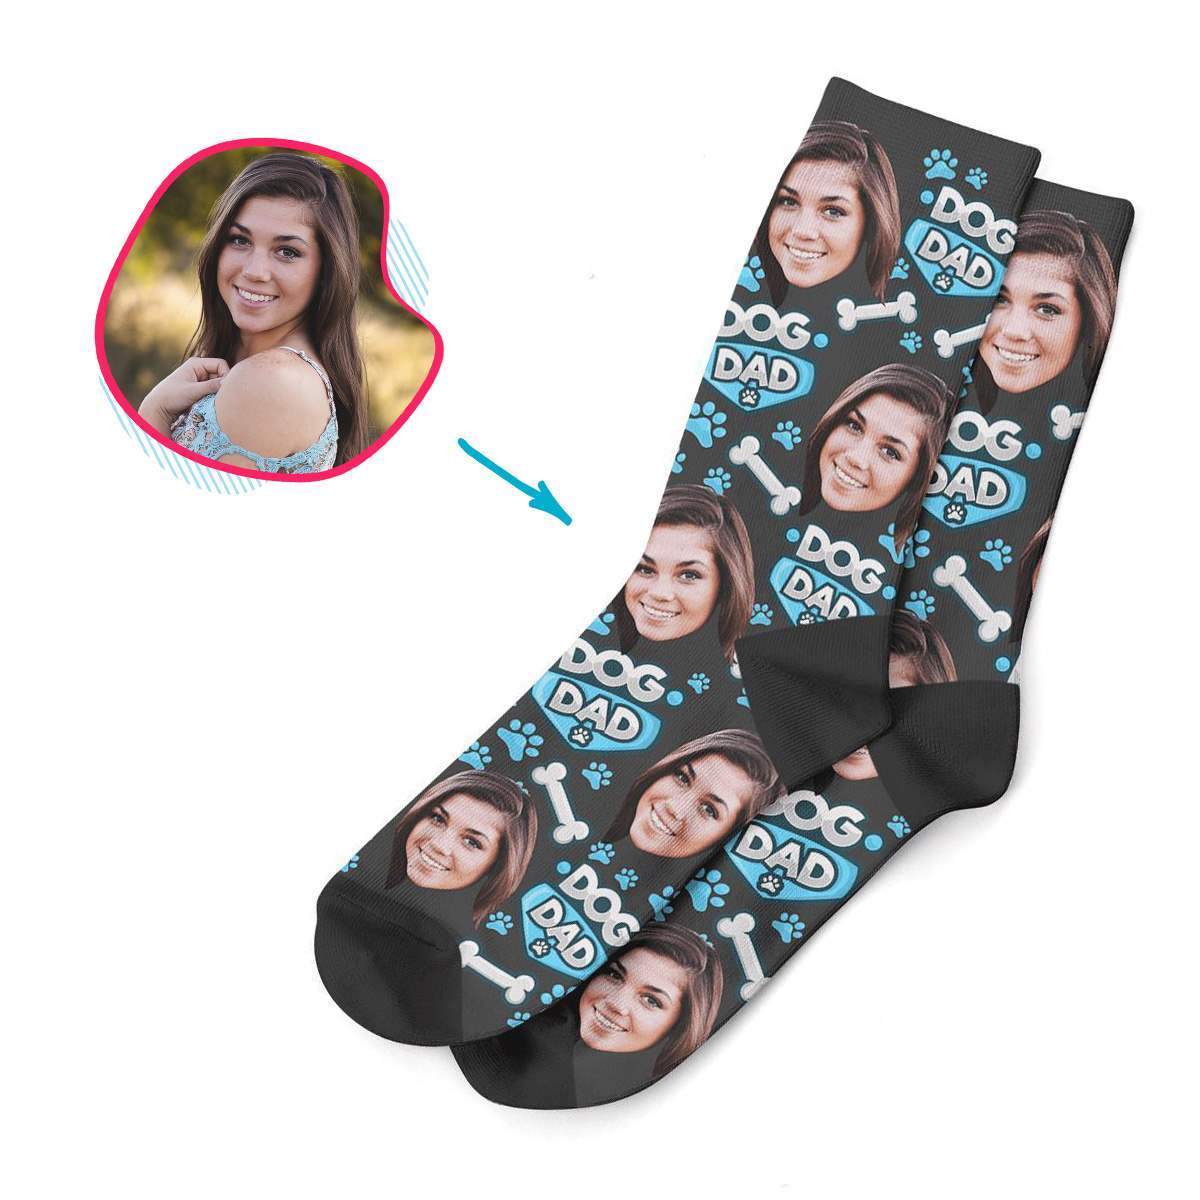 dark Dog Mom socks personalized with photo of face printed on them